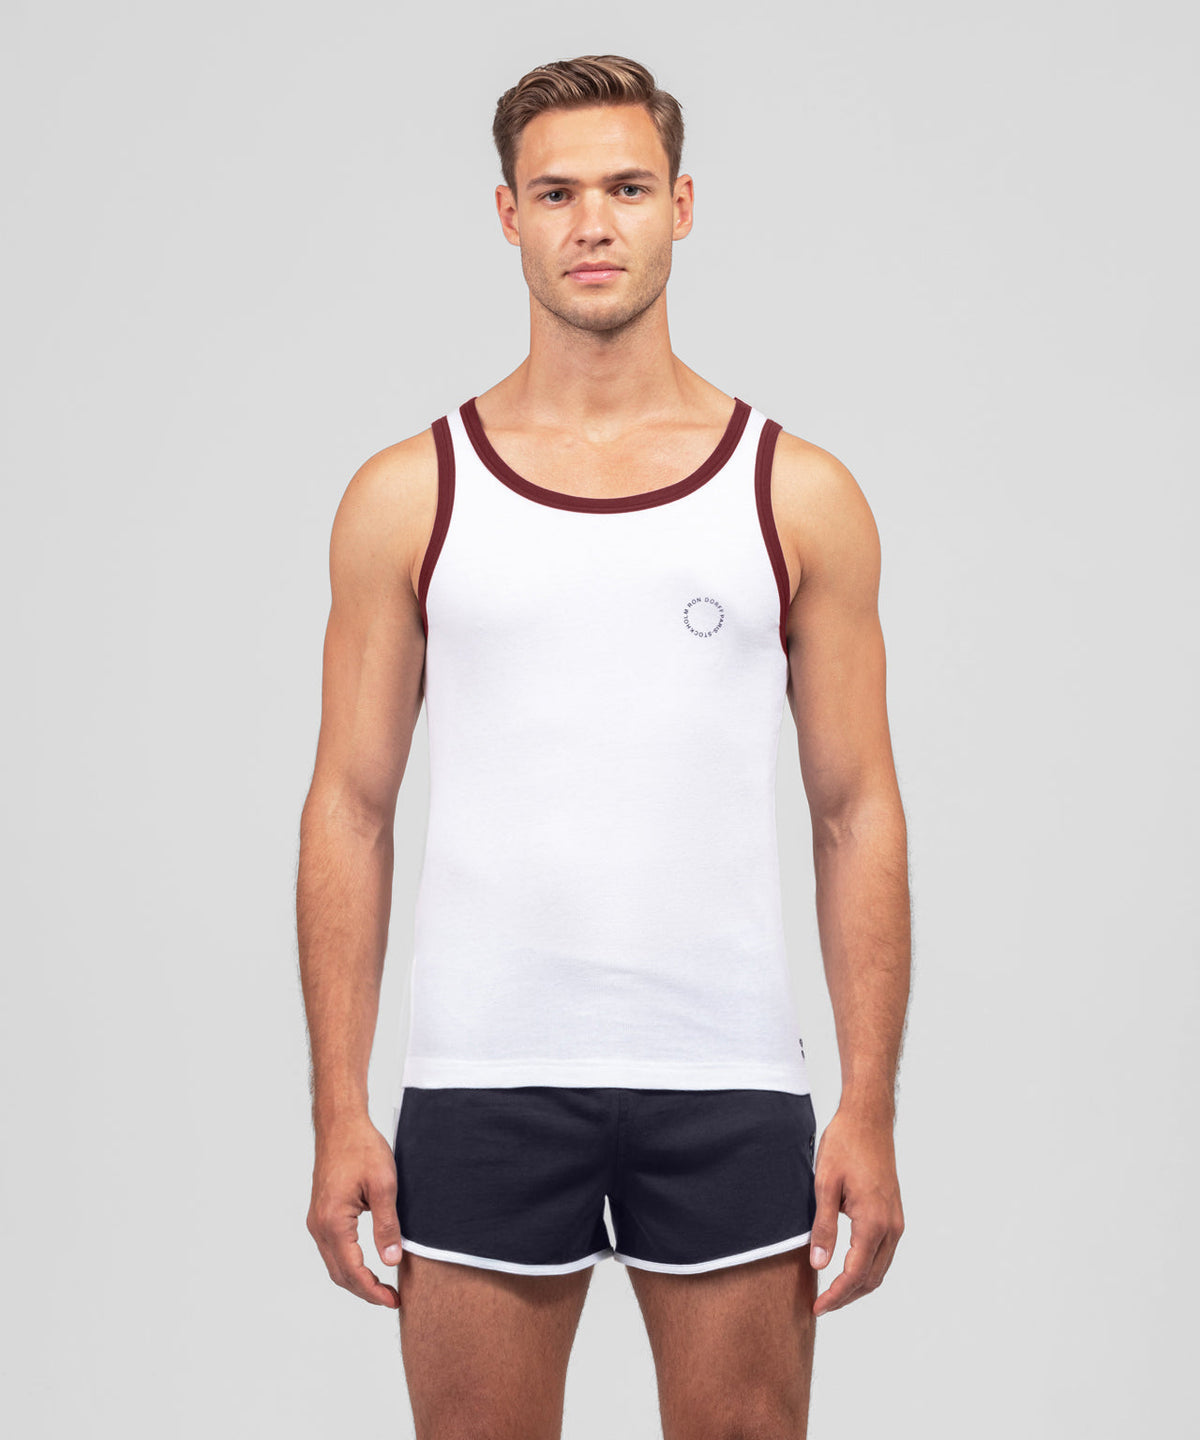 Ribbed Sports Tank Top: Amalfi Red / White